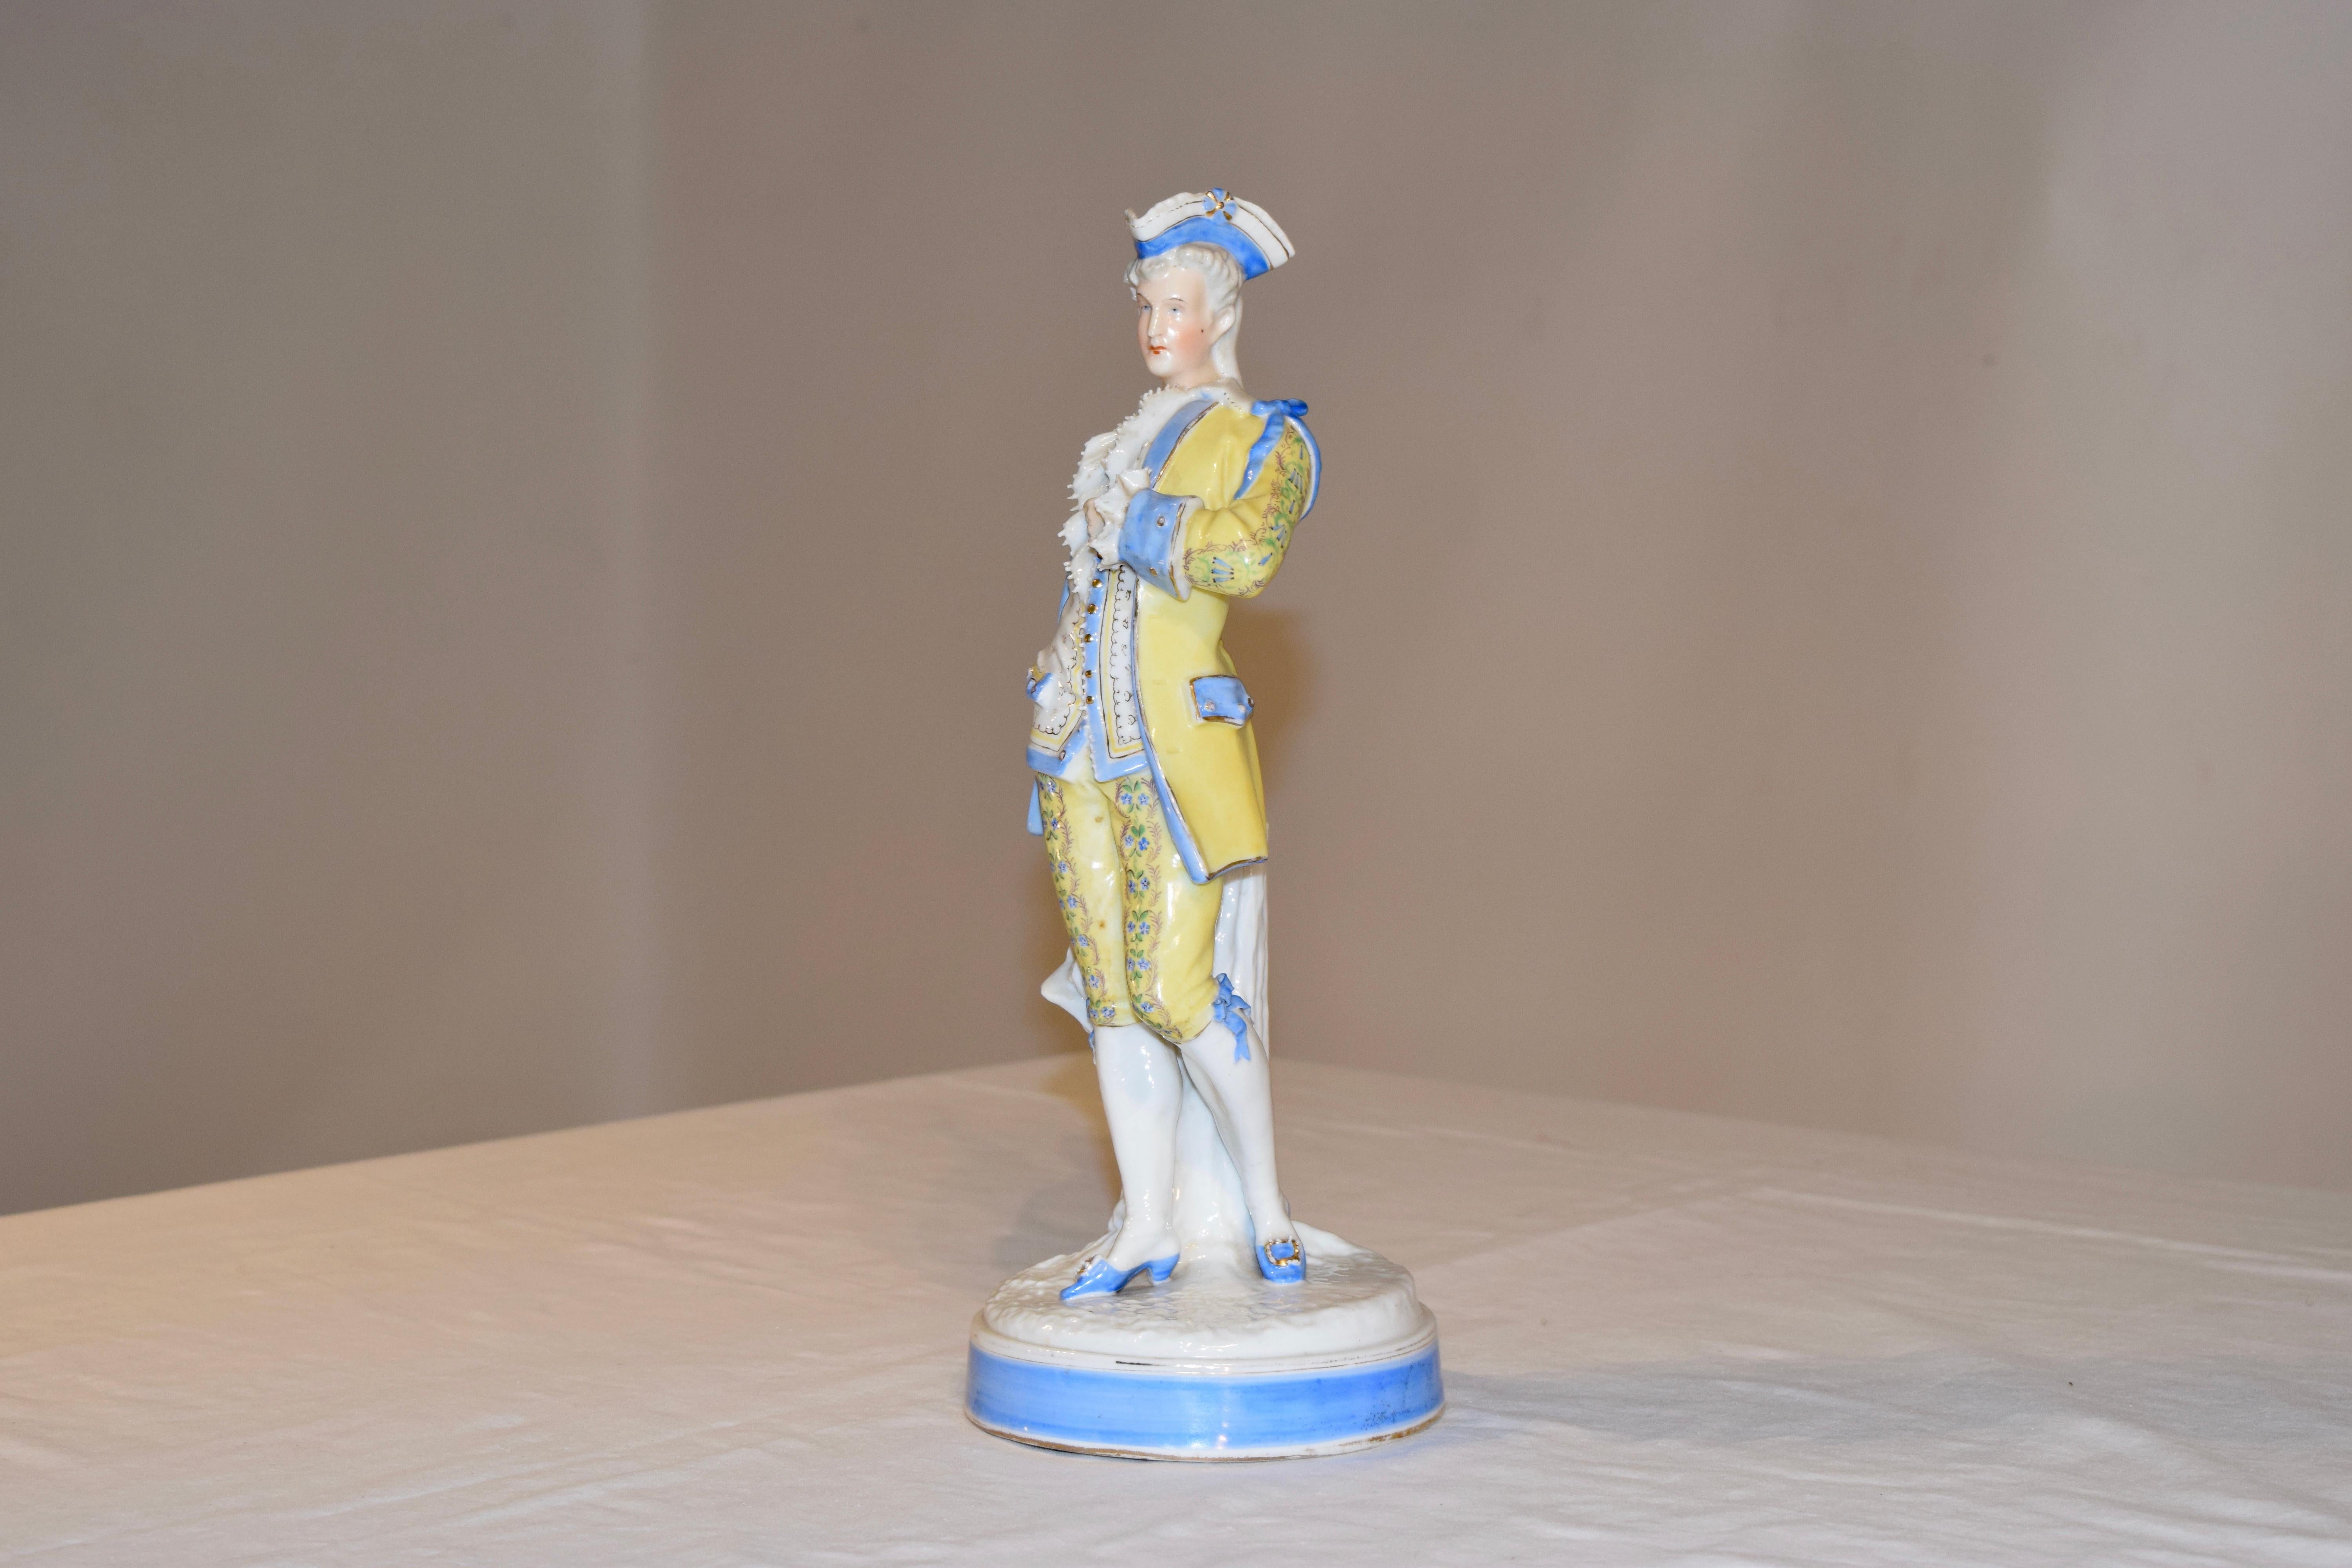 19th century Sitzendorf figure of a gentleman dressed in hand painted finery. He has a blue tricorn hat and a yellow suit, banded in lovely blue and hand decorated with florals and gold buttons. His shoes are blue as well with large buckle